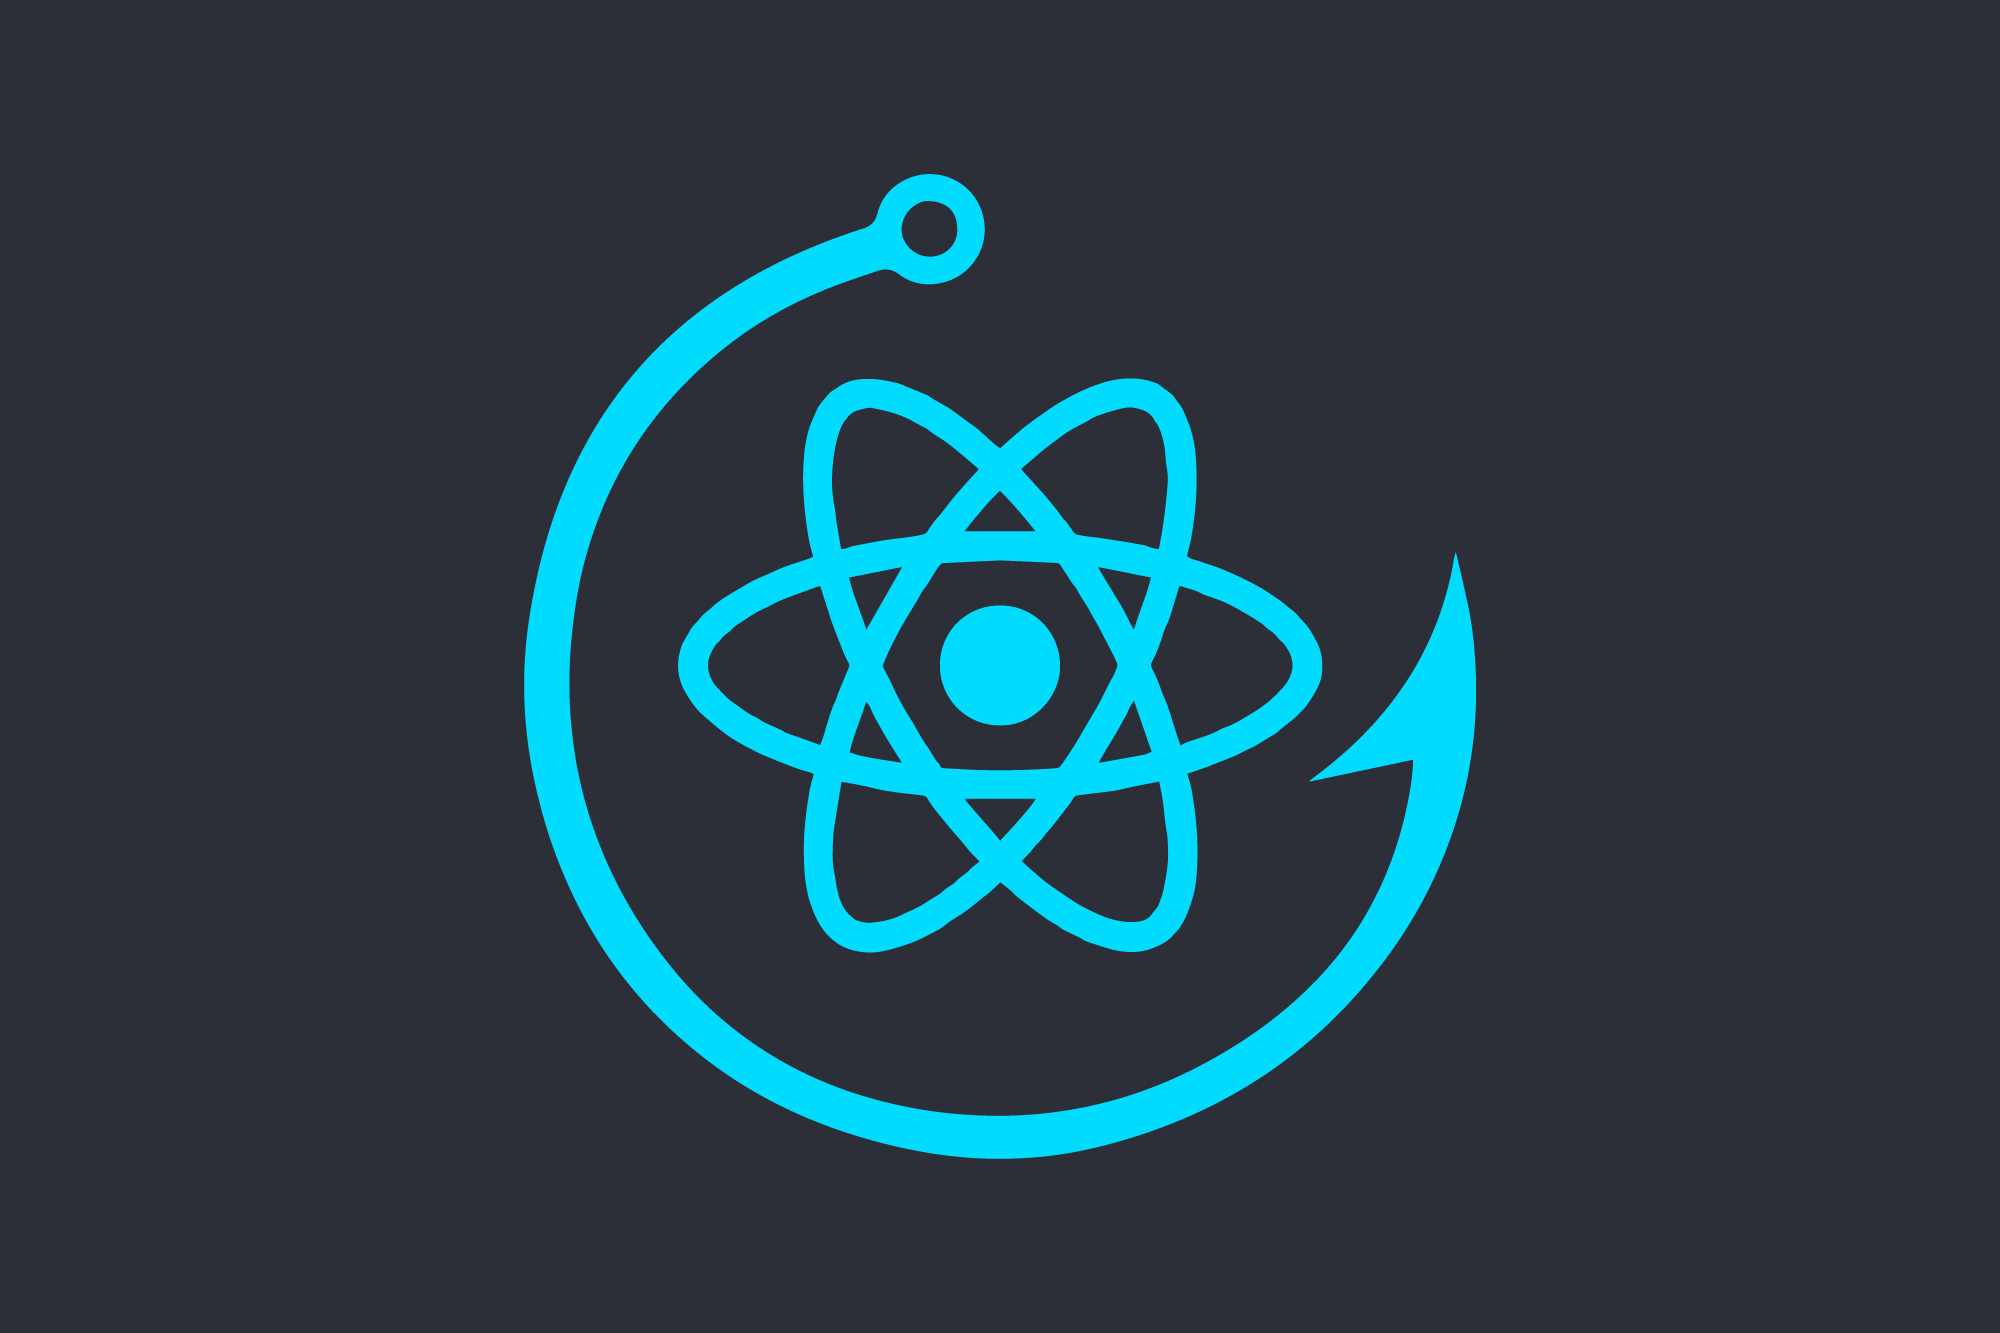 Two (More) Ways to Get Hooked on React